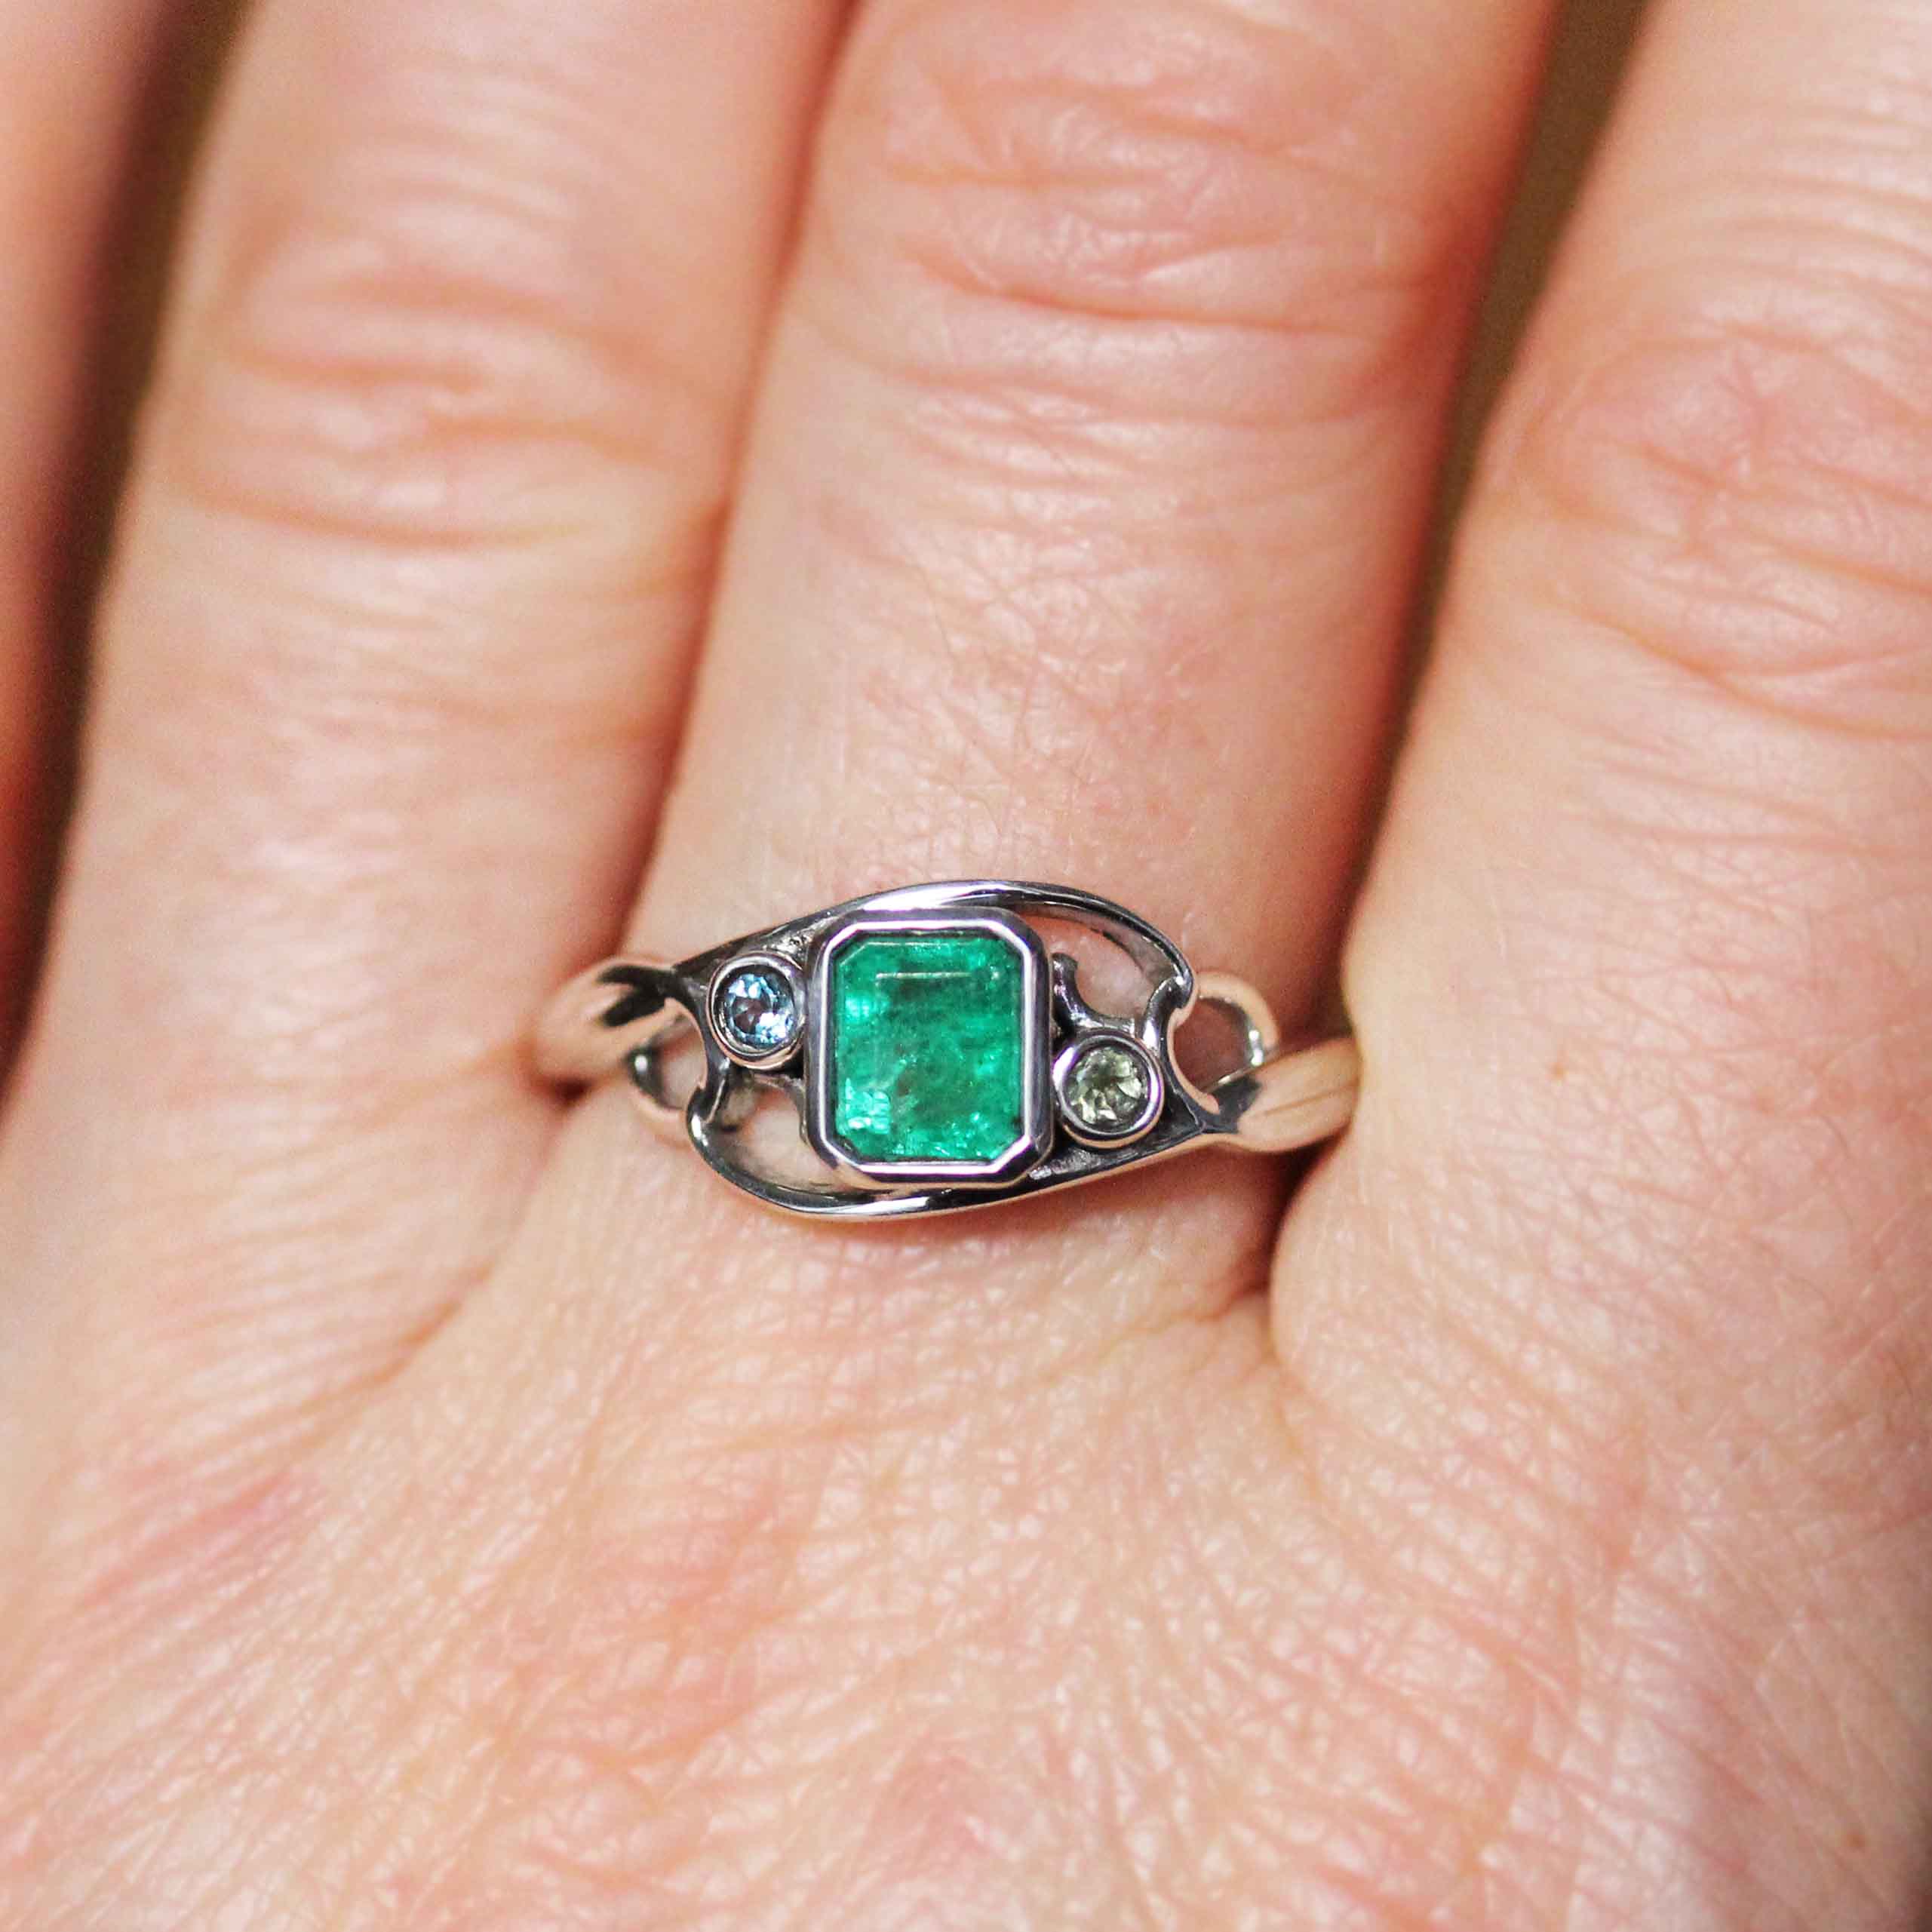 Mother's Birthstone Ring